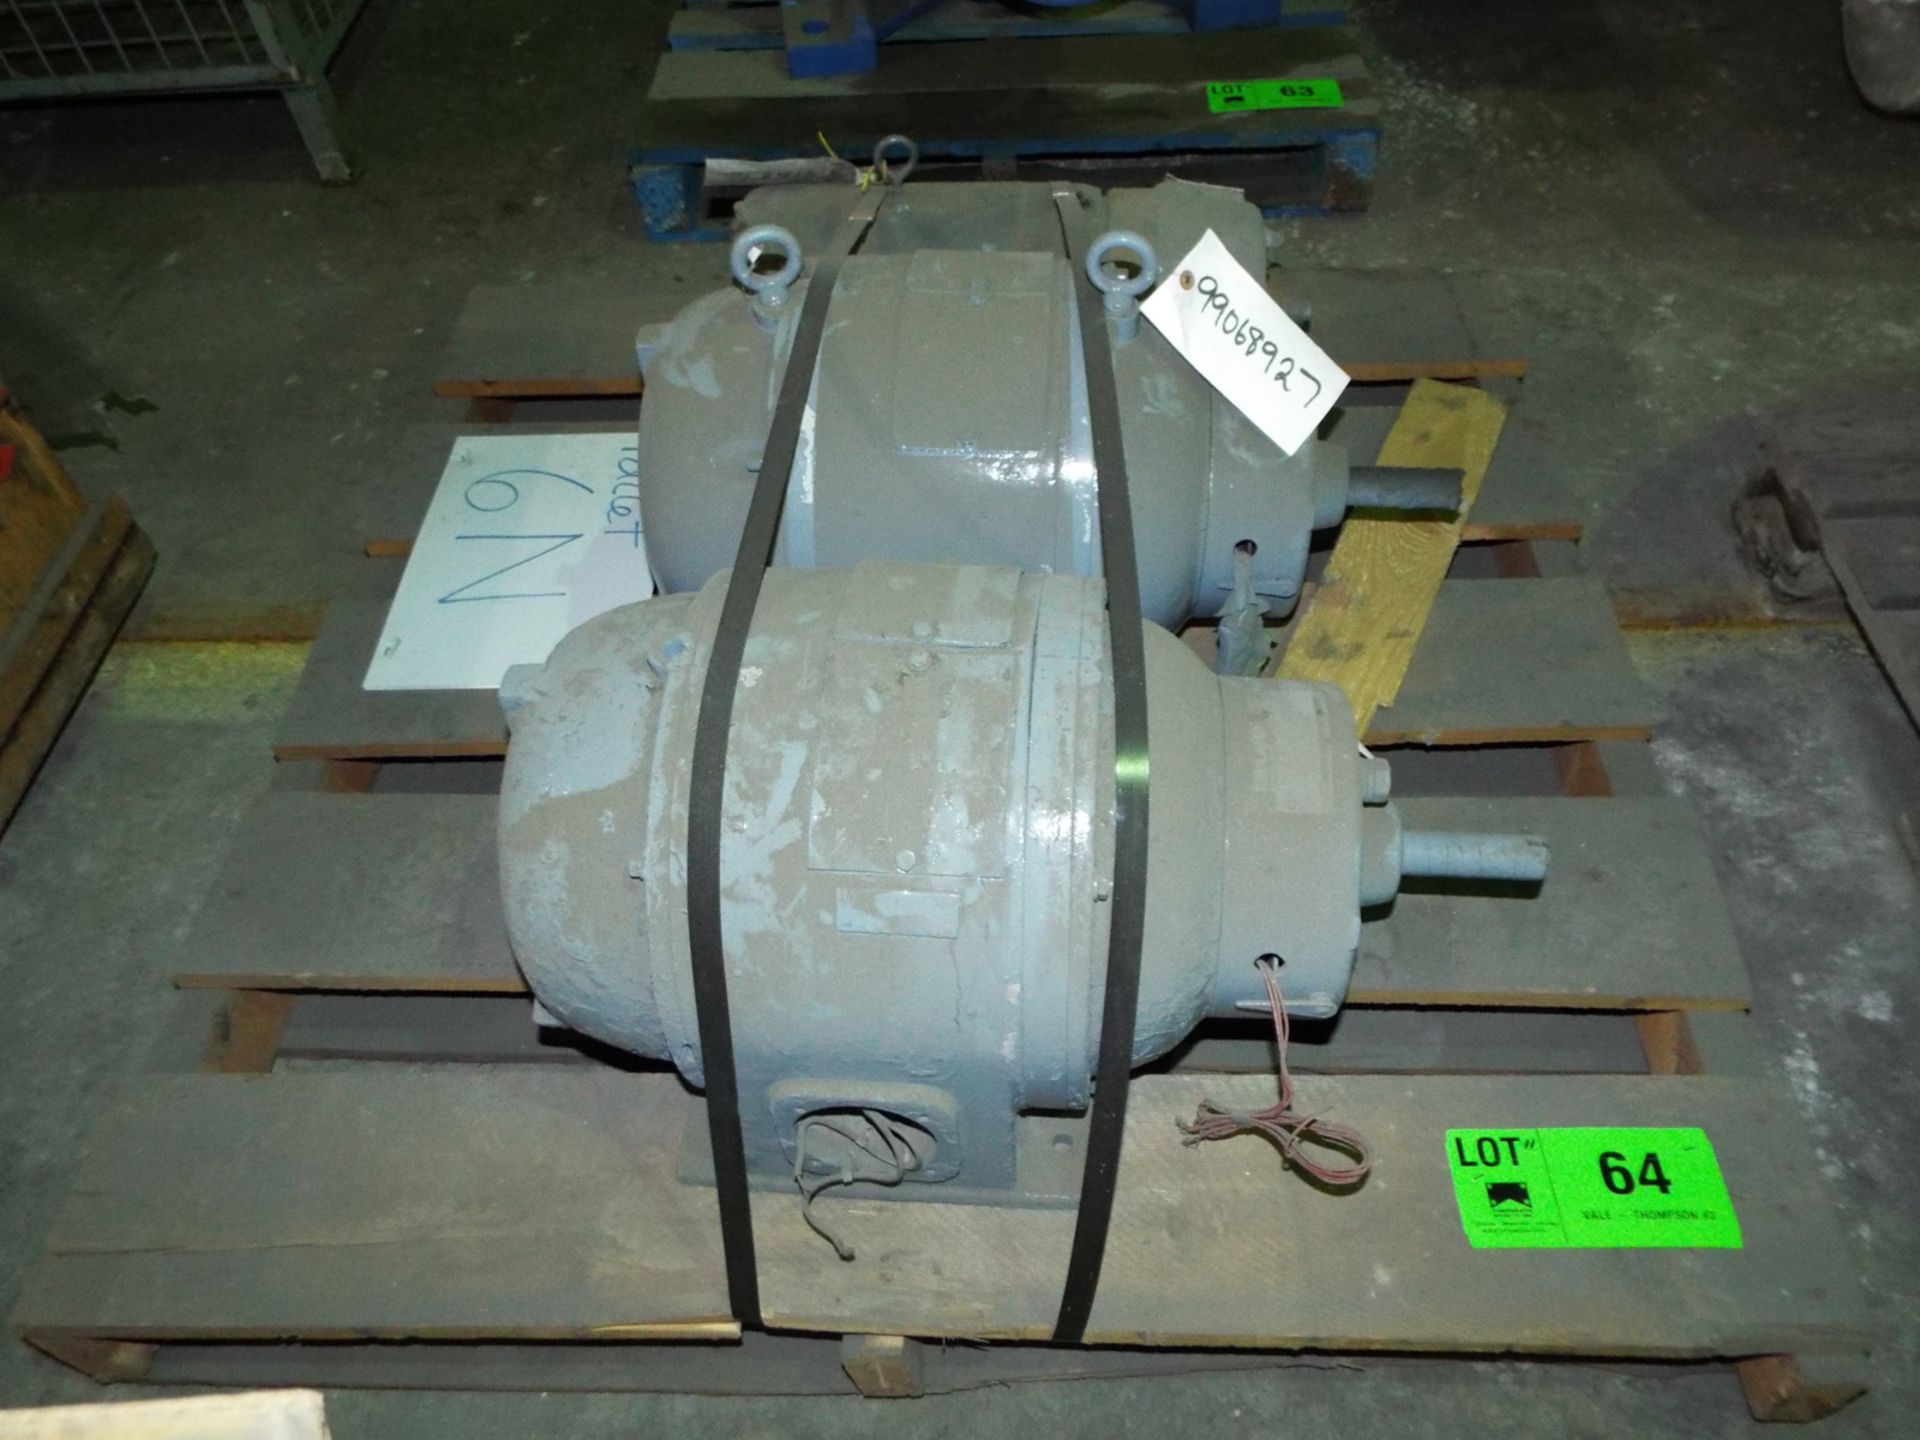 LOT/ CONTENTS OF SKID - (1) HOIST MOTOR 7.5 HP, 1800 RPM, 575V, 3PH, 60HZ, 254U, WITH MAGNETIC